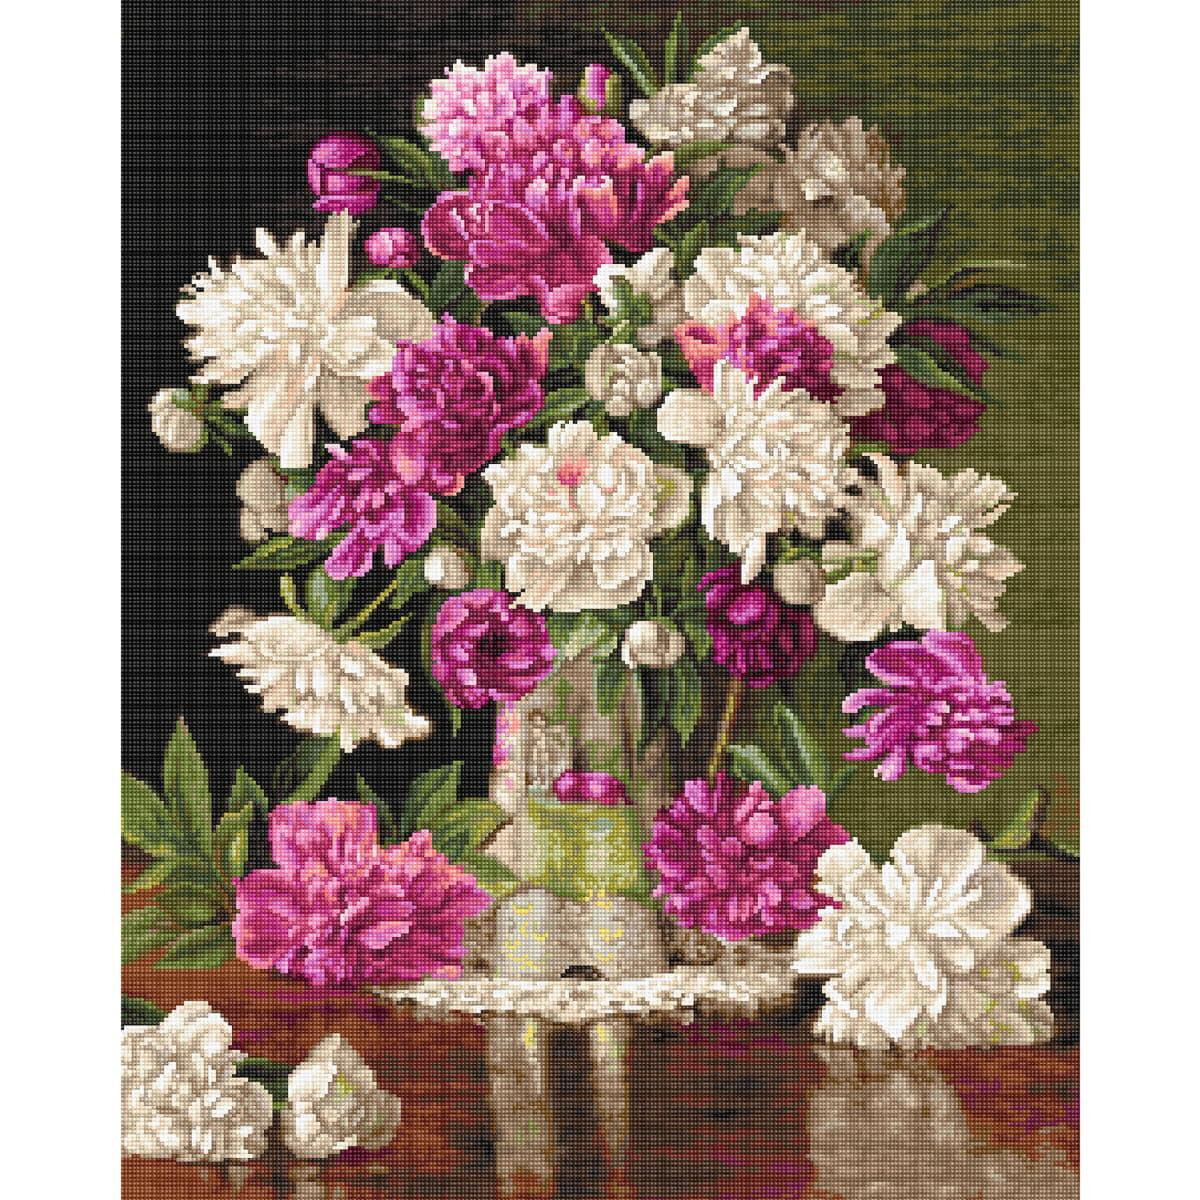 A colorful bouquet of pink and white peonies is arranged...